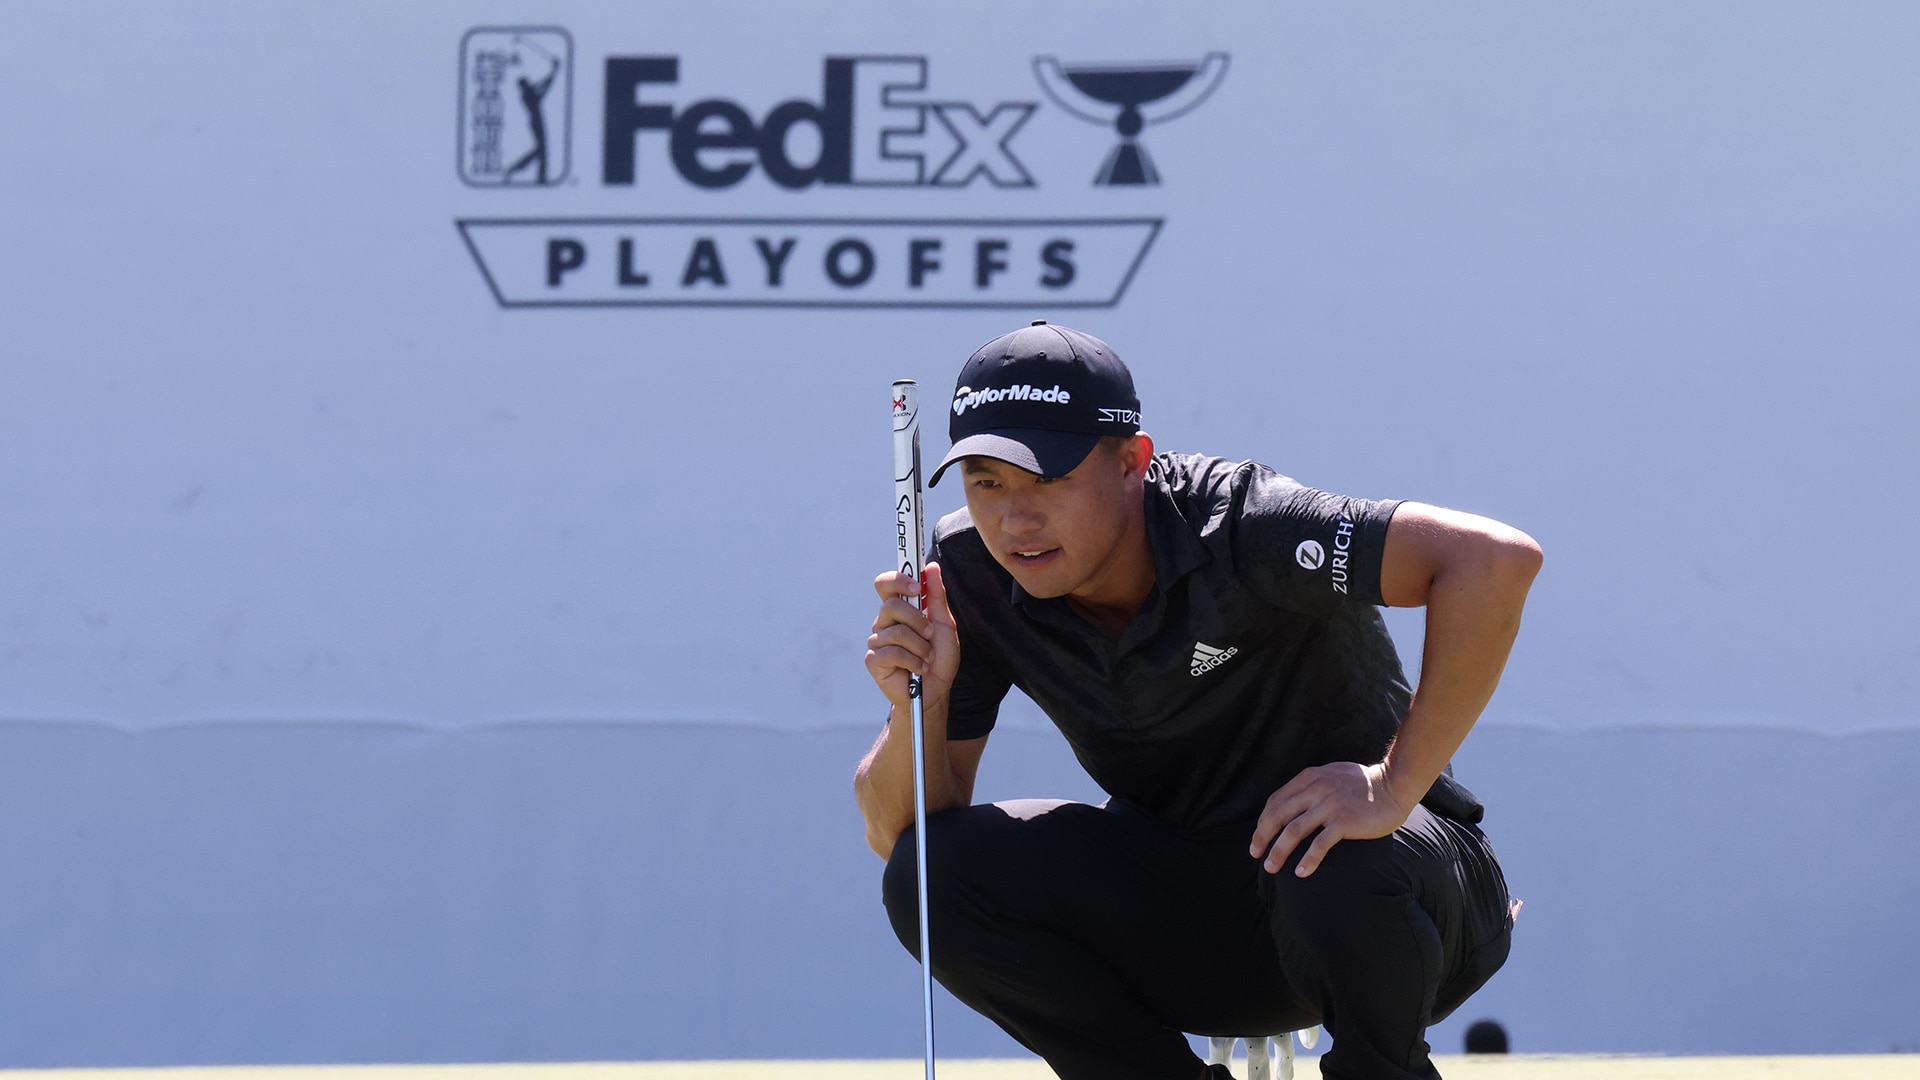 These are three big storylines entering this year’s FedExCup Playoffs